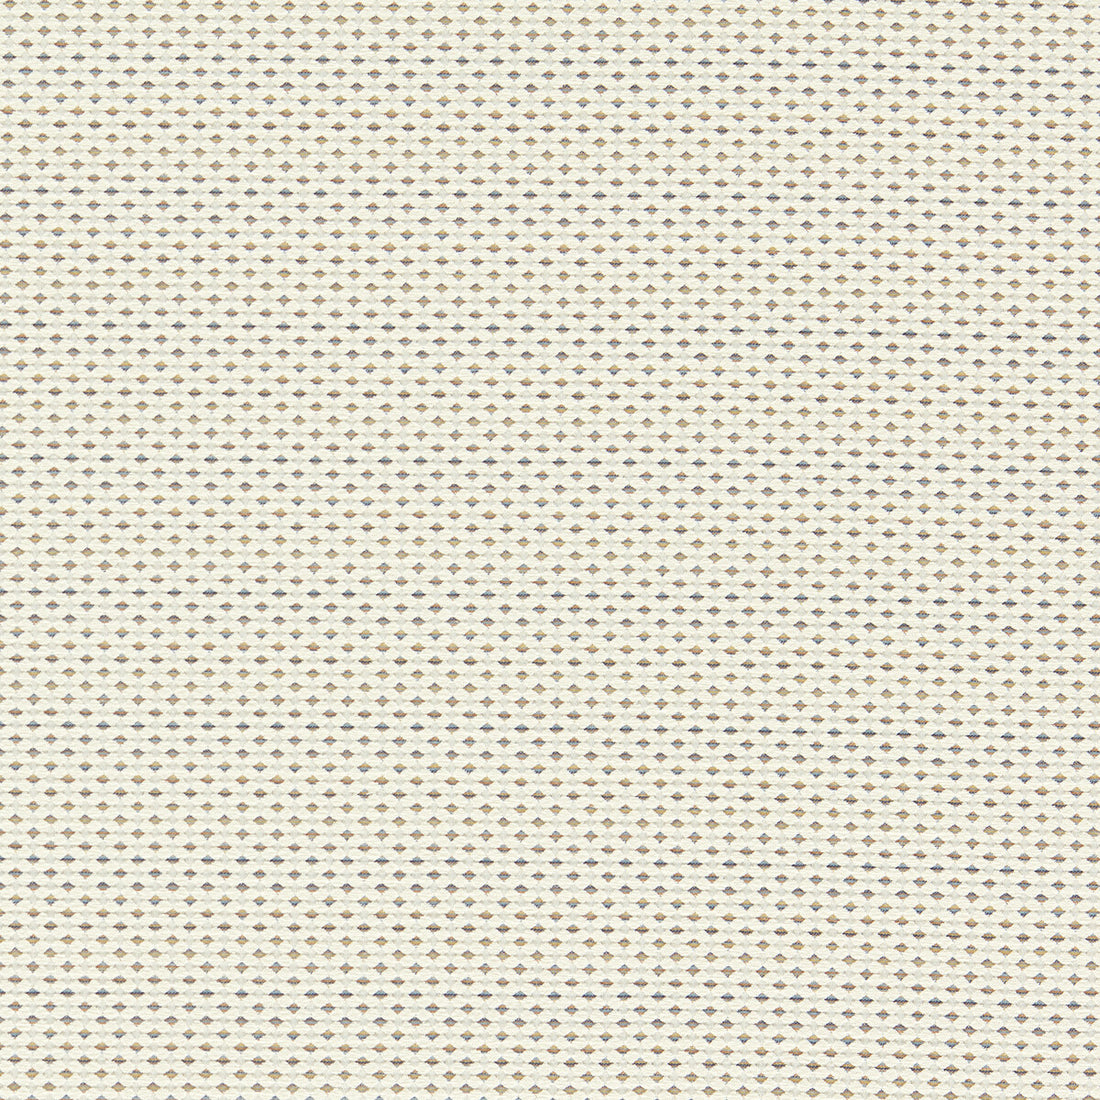 Pavo fabric in ivory/denim color - pattern F1620/03.CAC.0 - by Clarke And Clarke in the Clarke And Clarke Equinox 2 collection